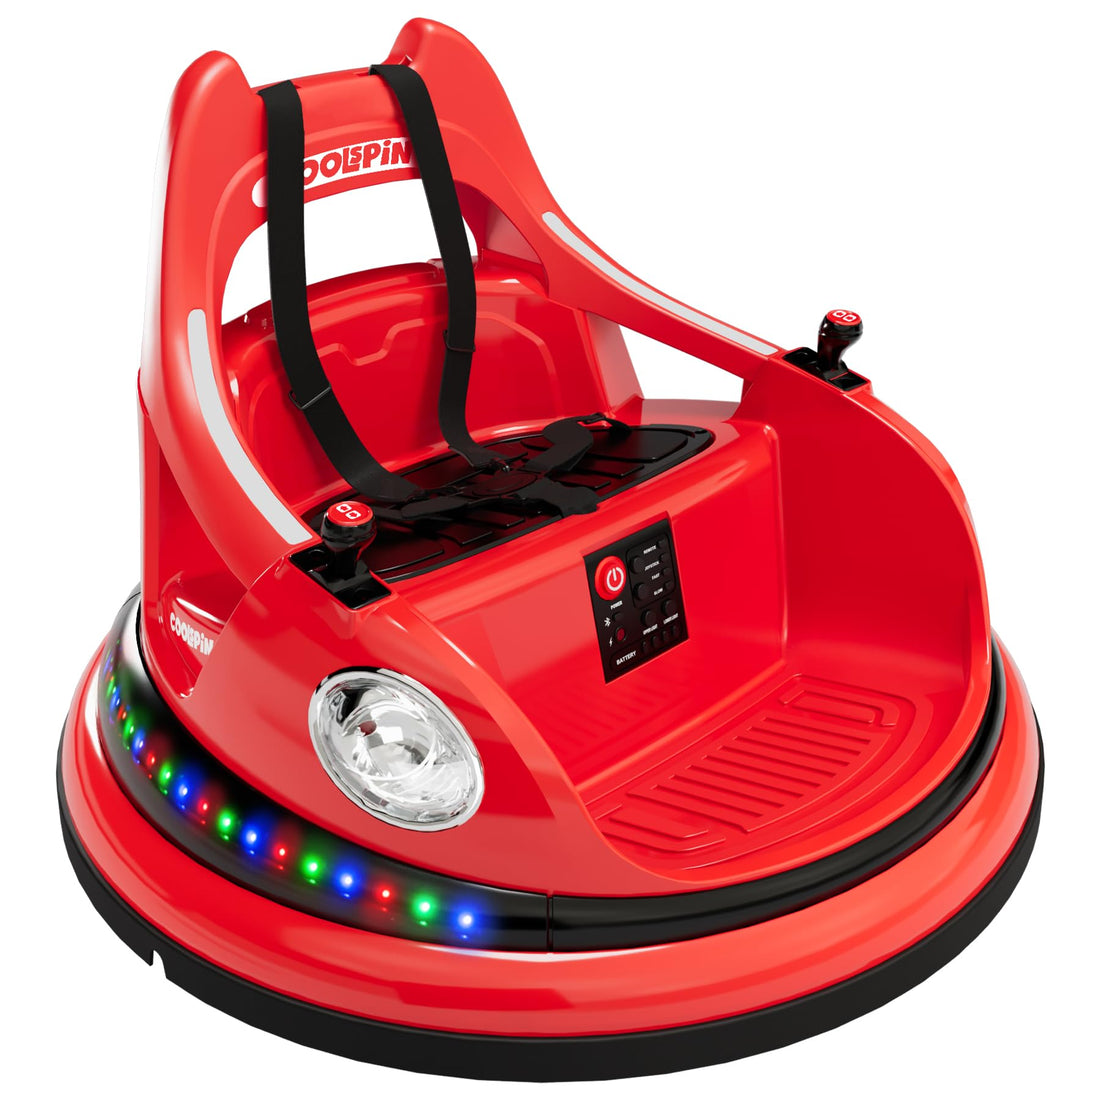 Electric Bumper Car for Kids, 12V Ride on Toddler Bumping Car W/Remote Control, LED Lights & 360 Degree Spin, ASTM Certified